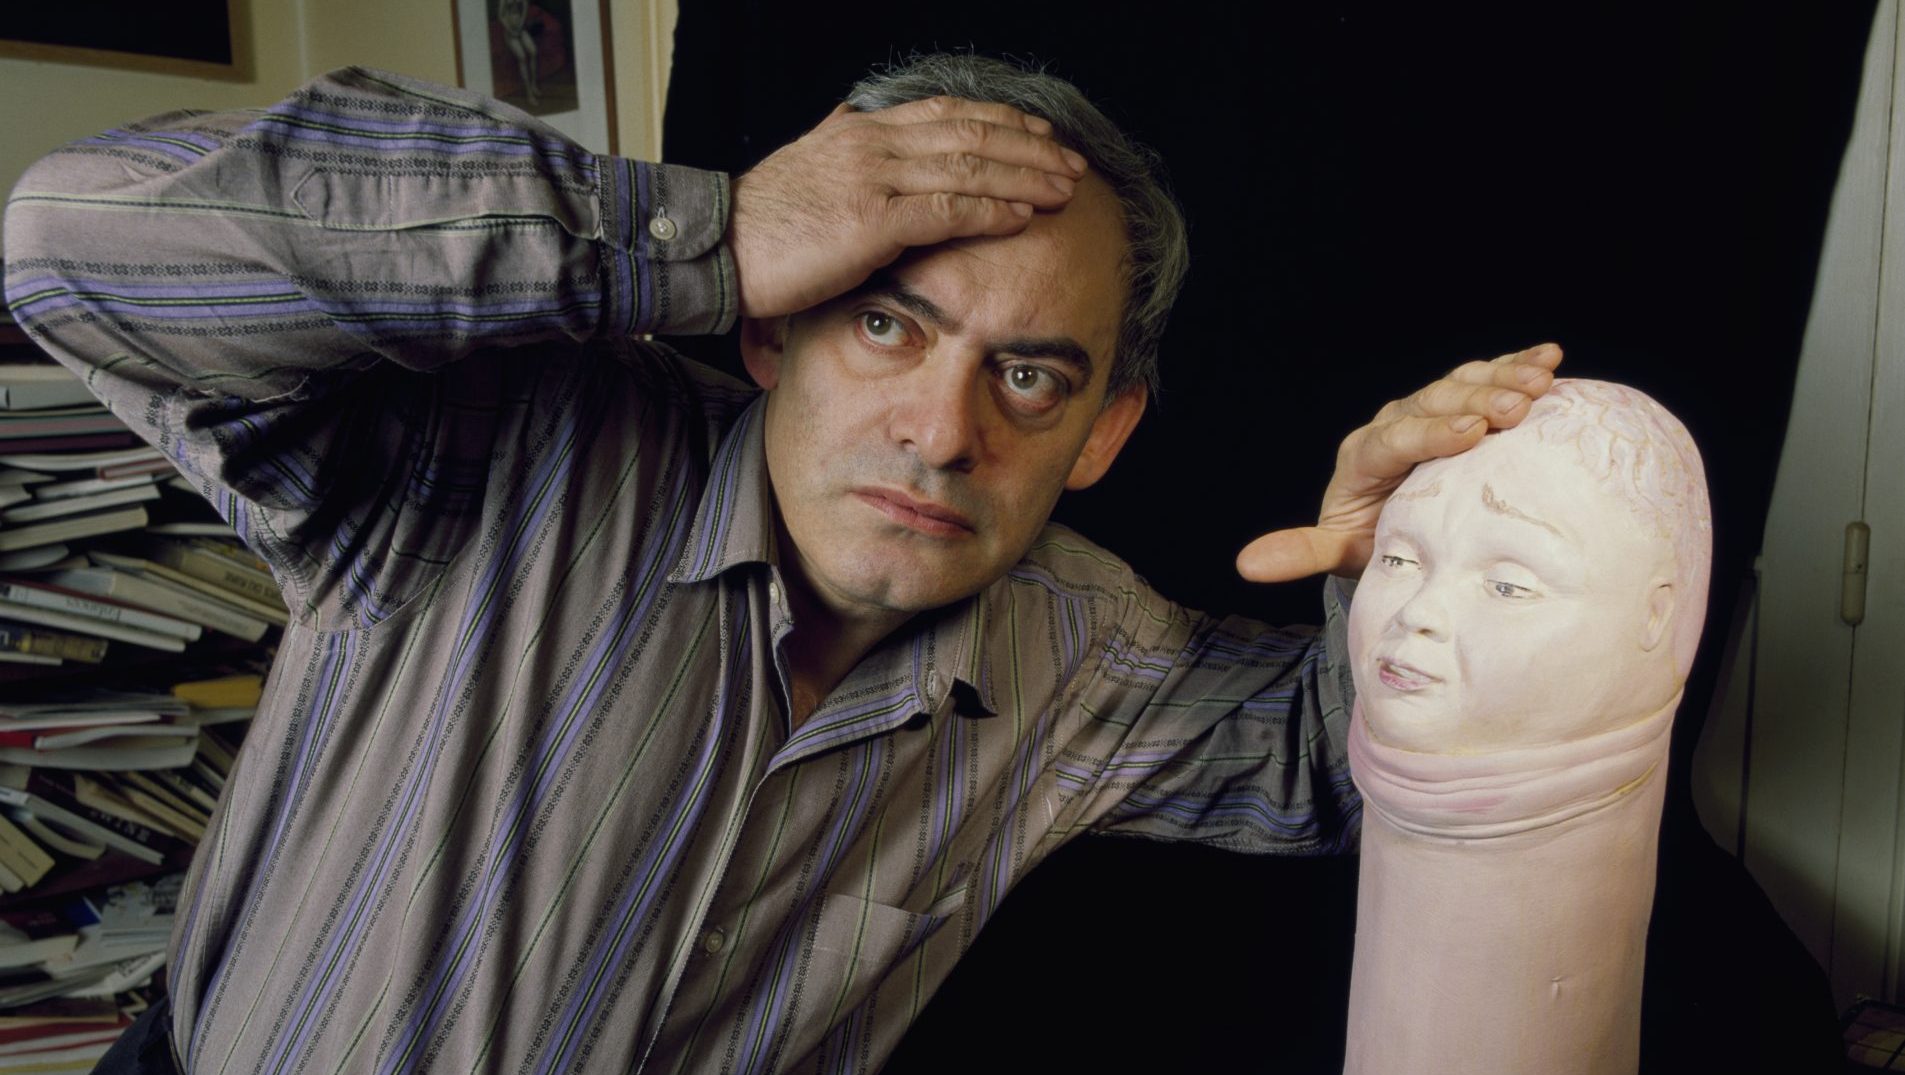 French writer and artist Roland Topor at home with one of his creations. Photo: Sergio Gaudenti/Sygma/Getty